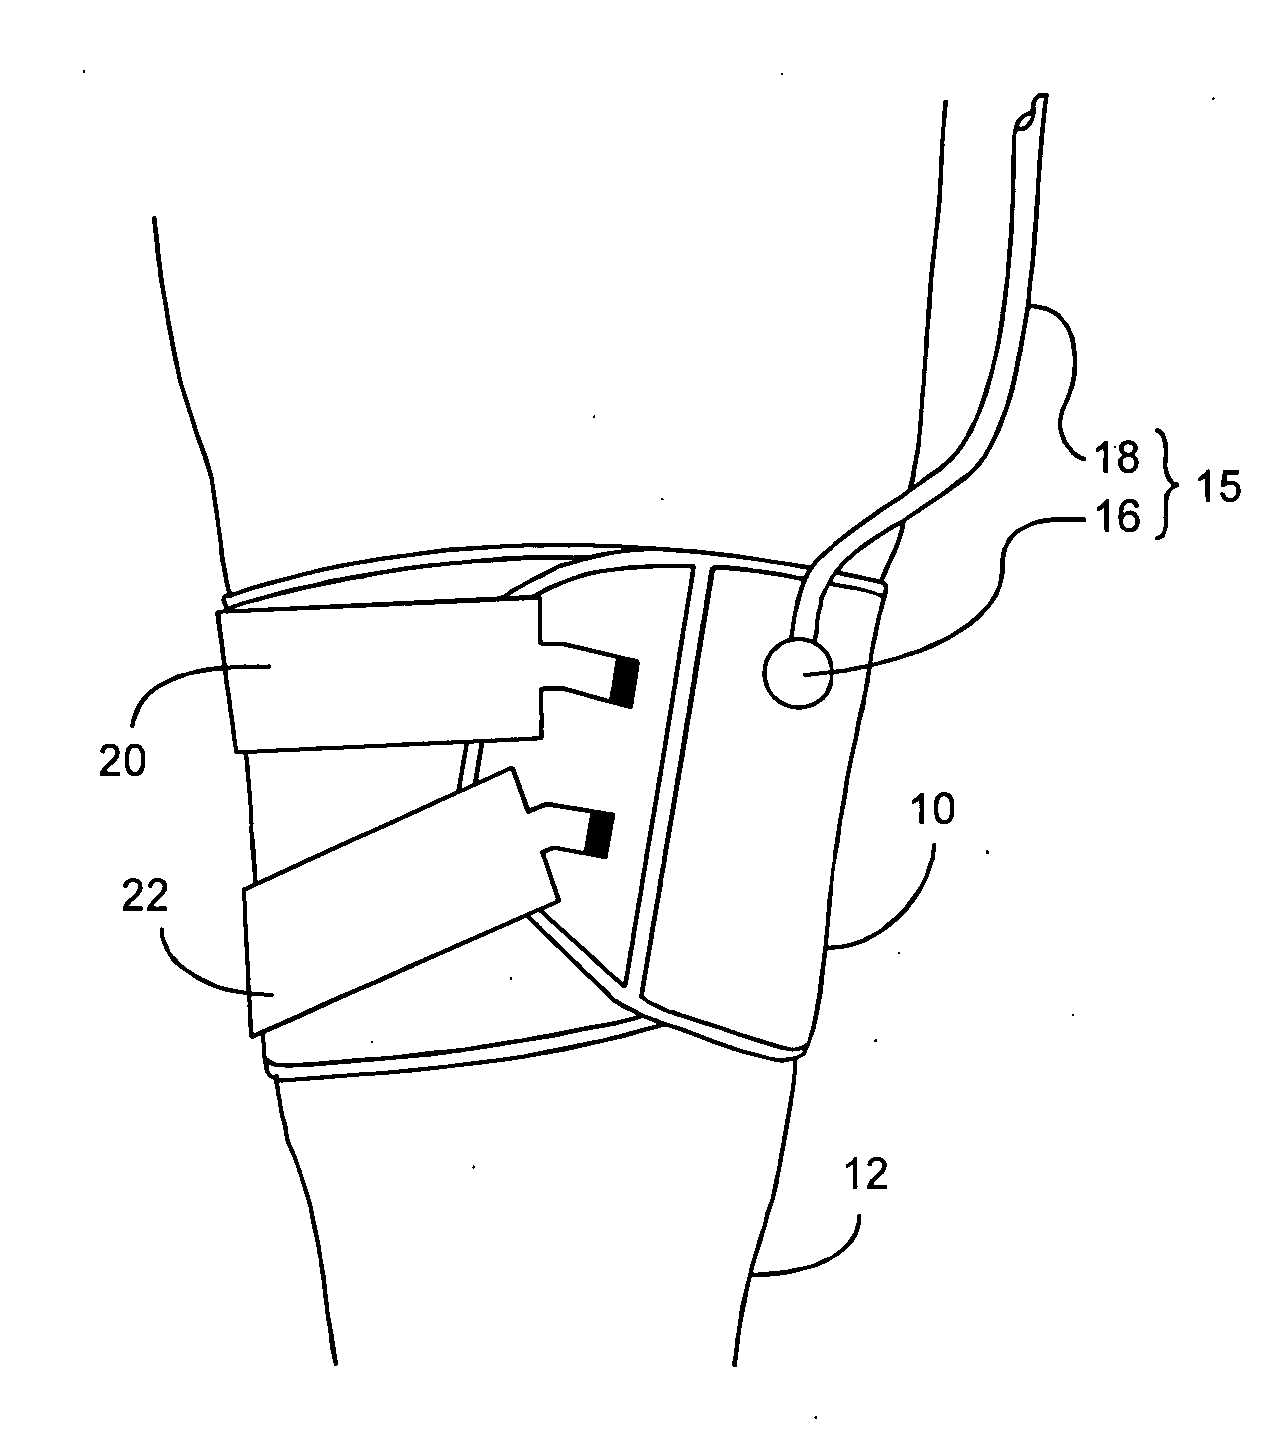 Low-cost contour cuff for surgical tourniquet systems